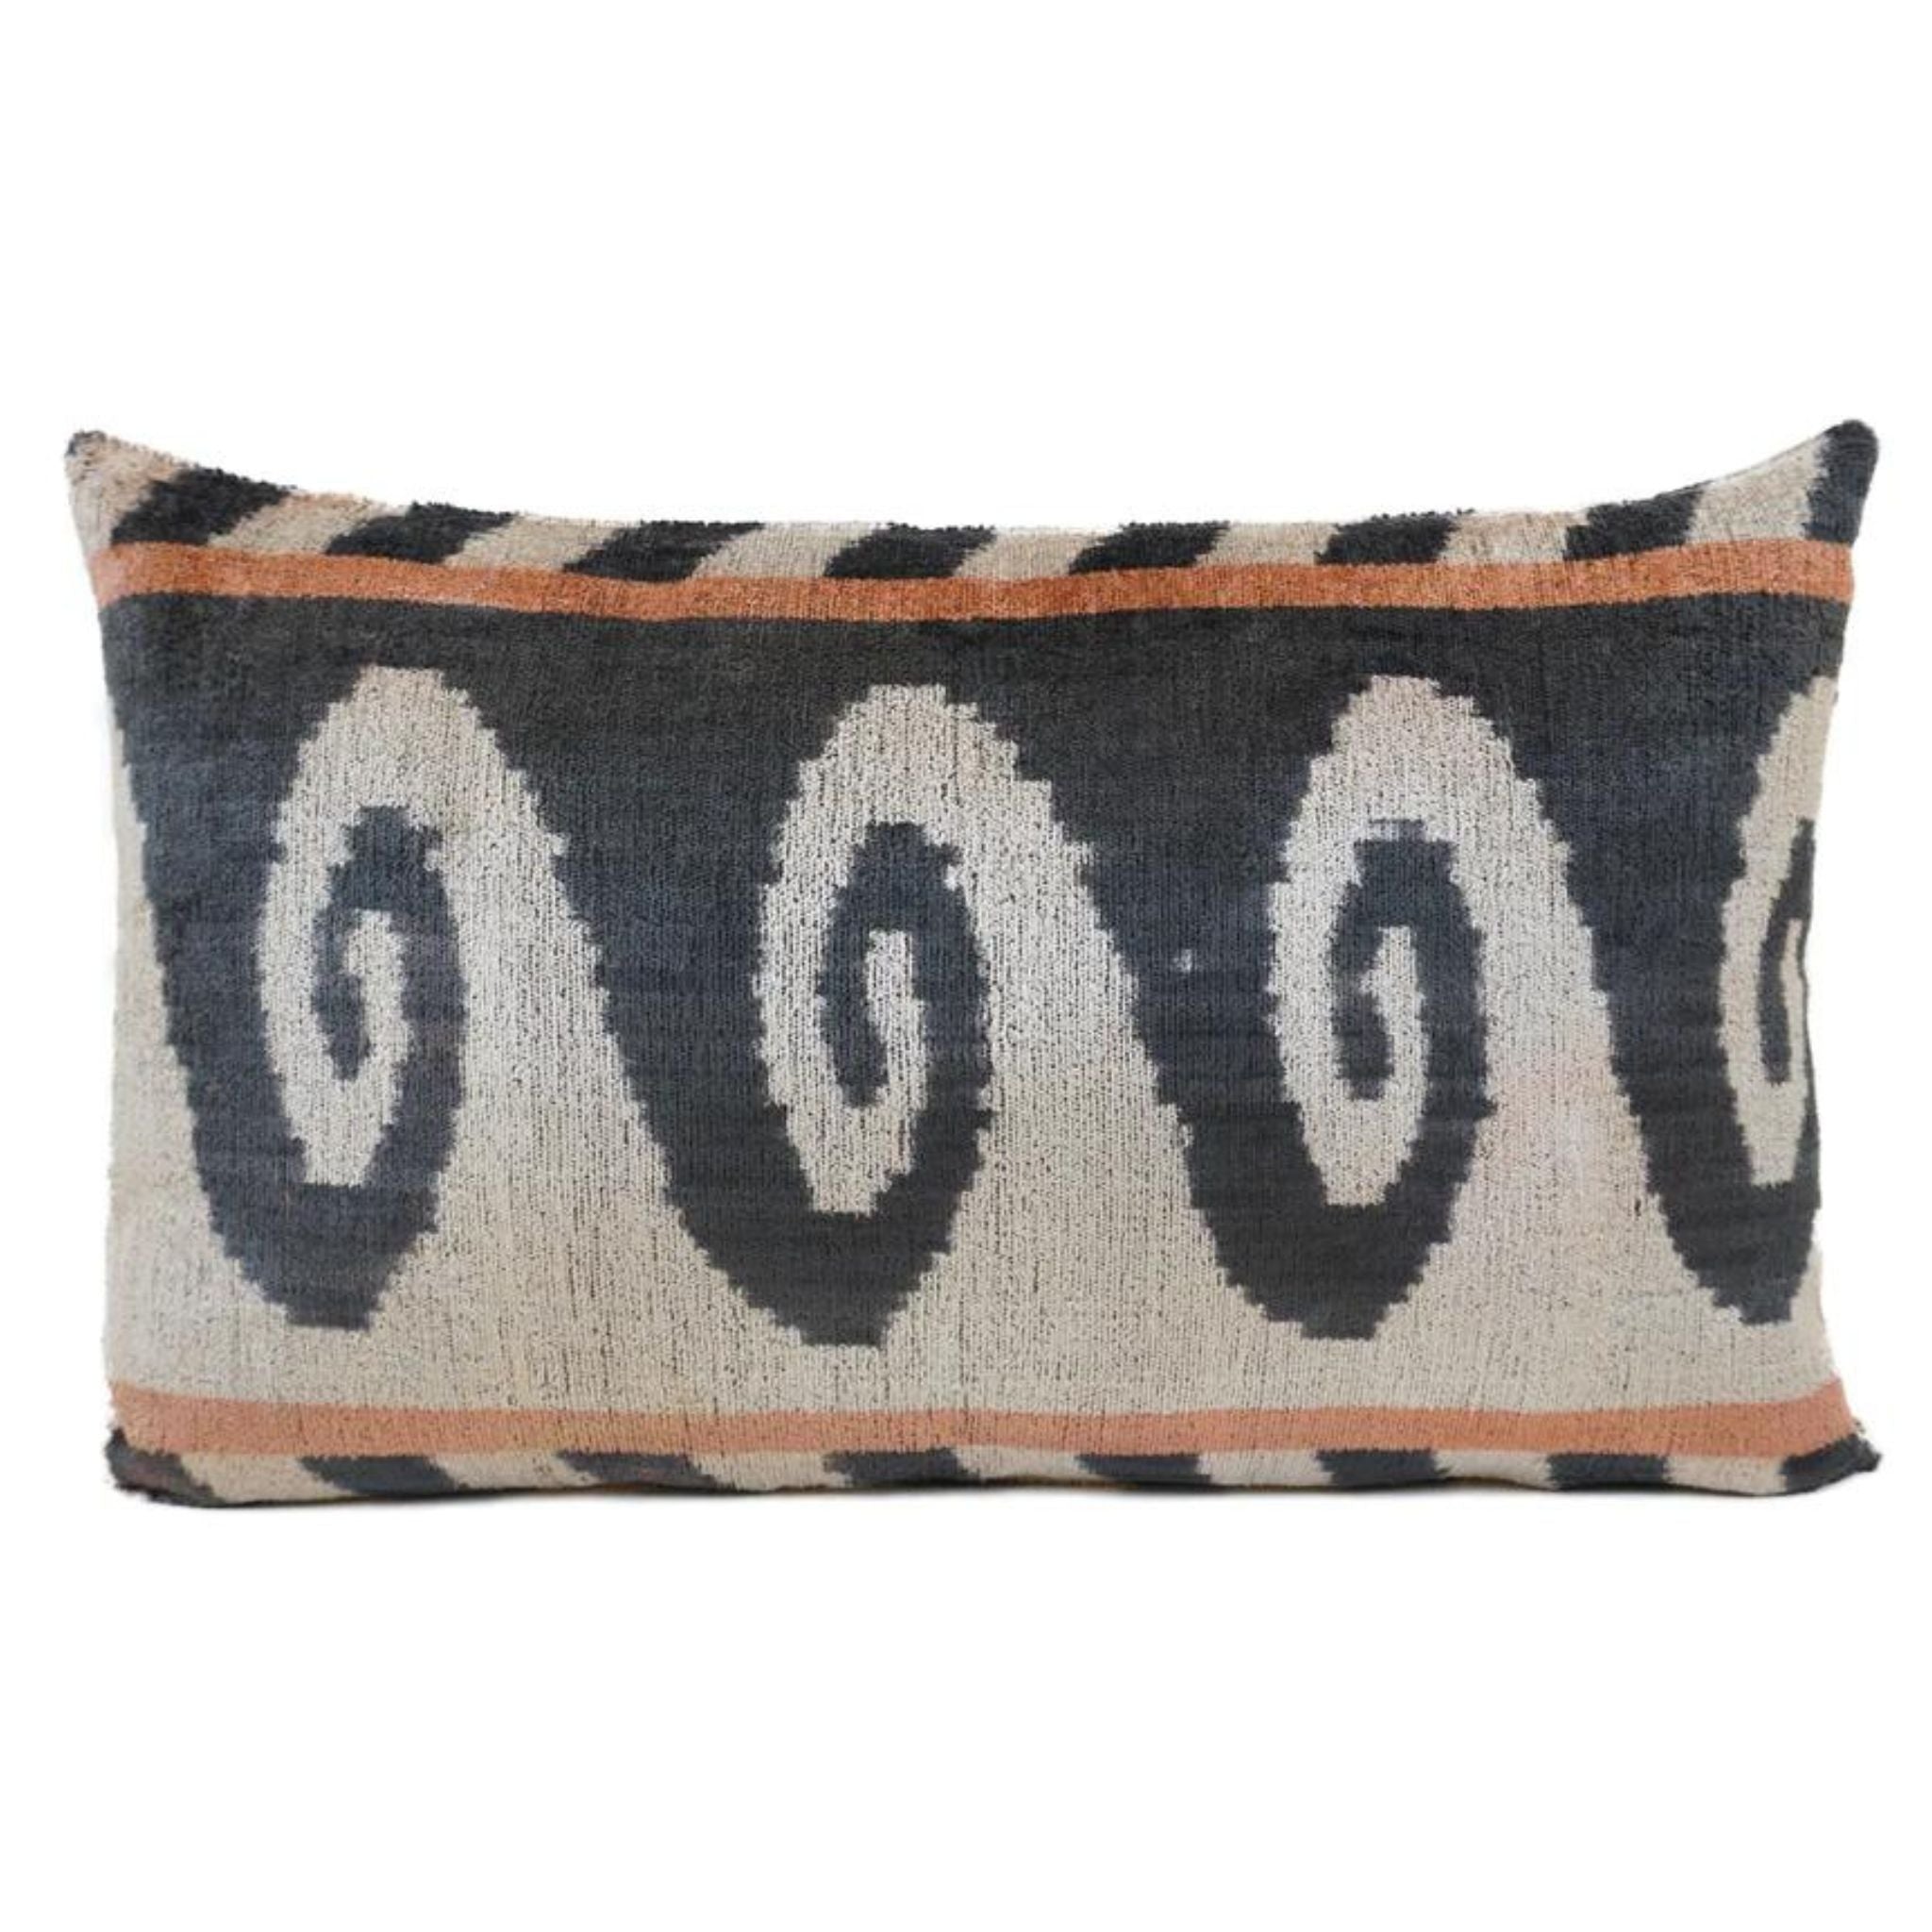 HILA THROW PILLOW - Simply Elevated Home Furnishings 